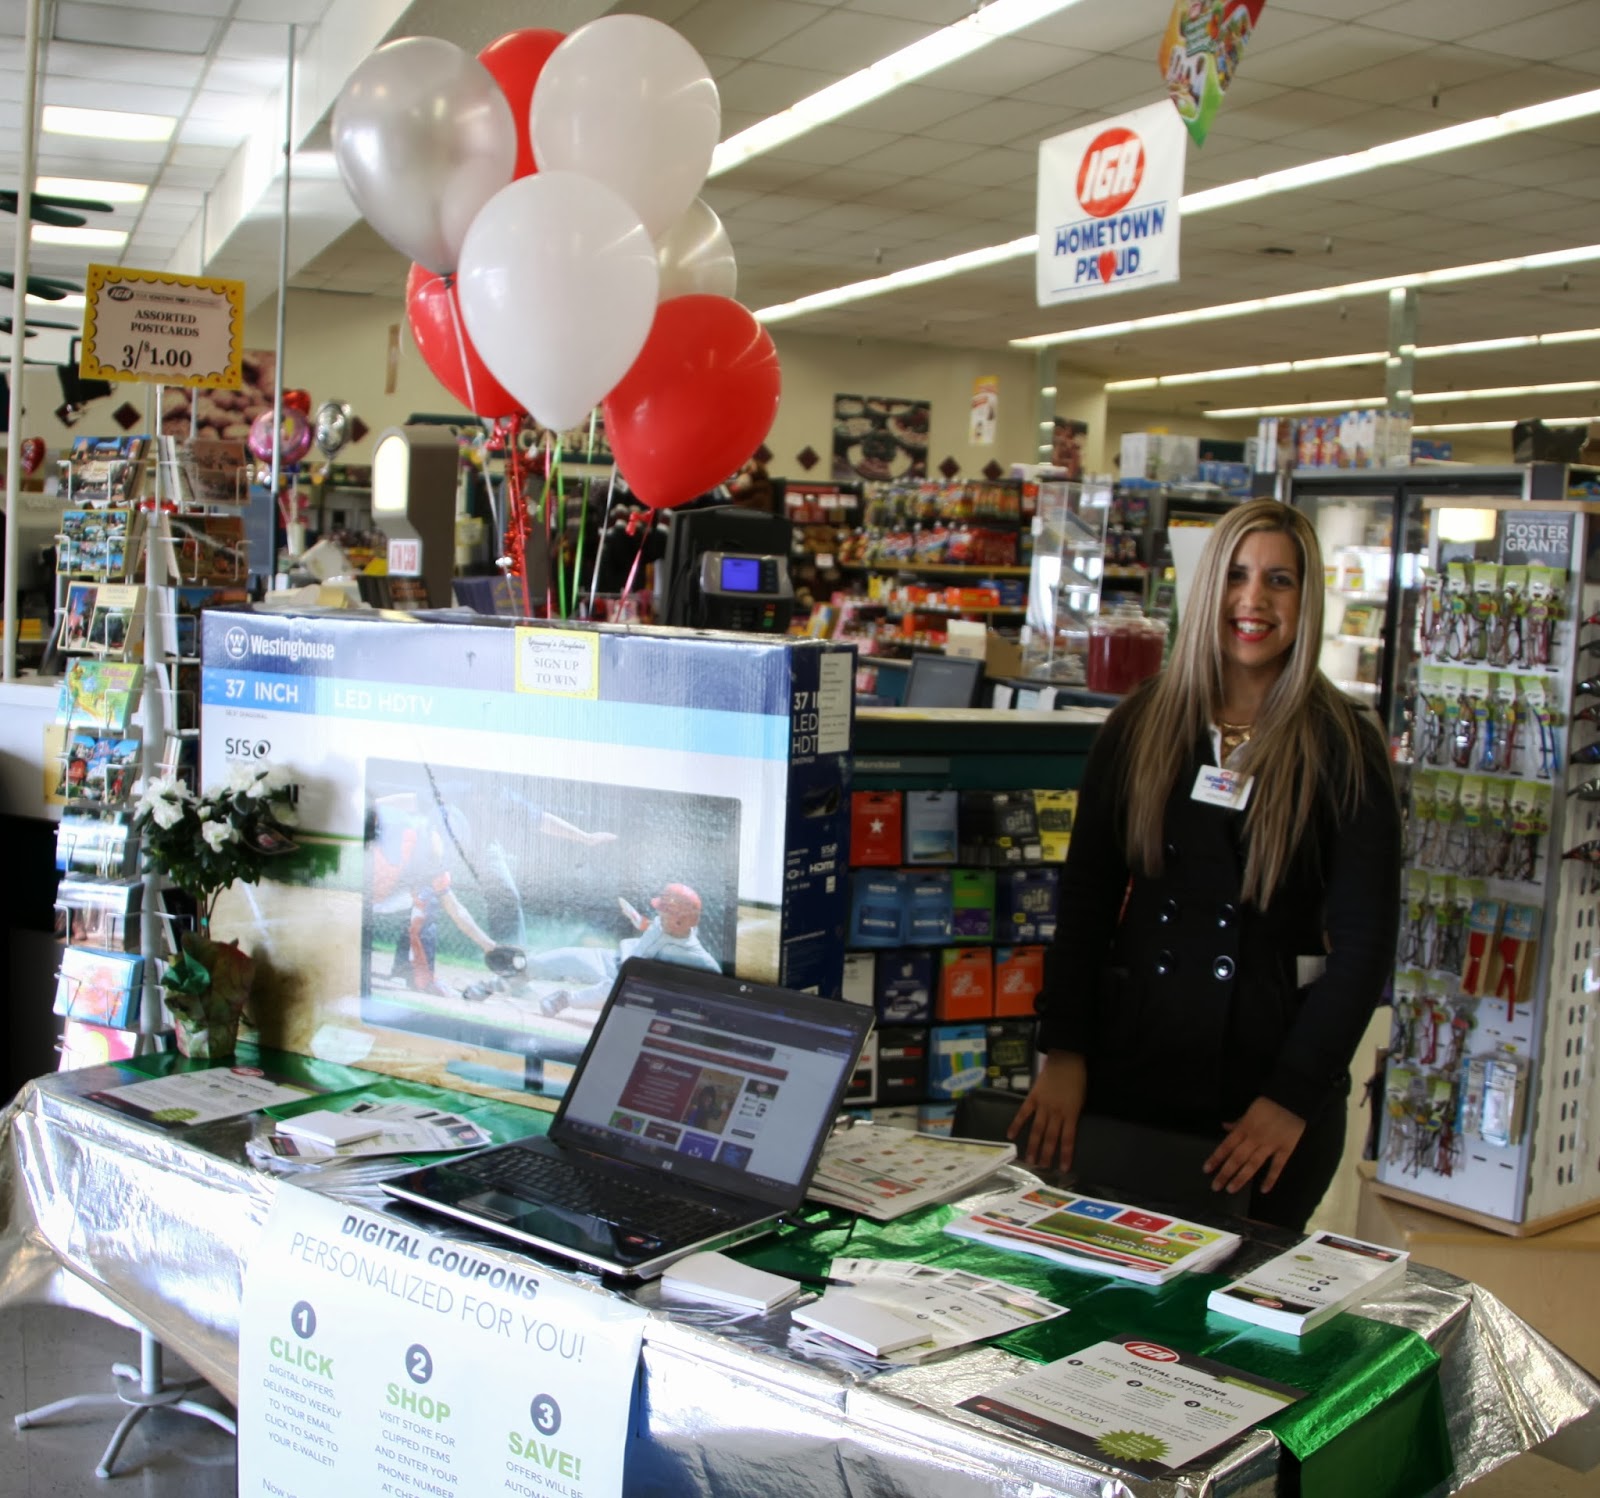 Vanessa at the information station in Payless IGA Copperopolis